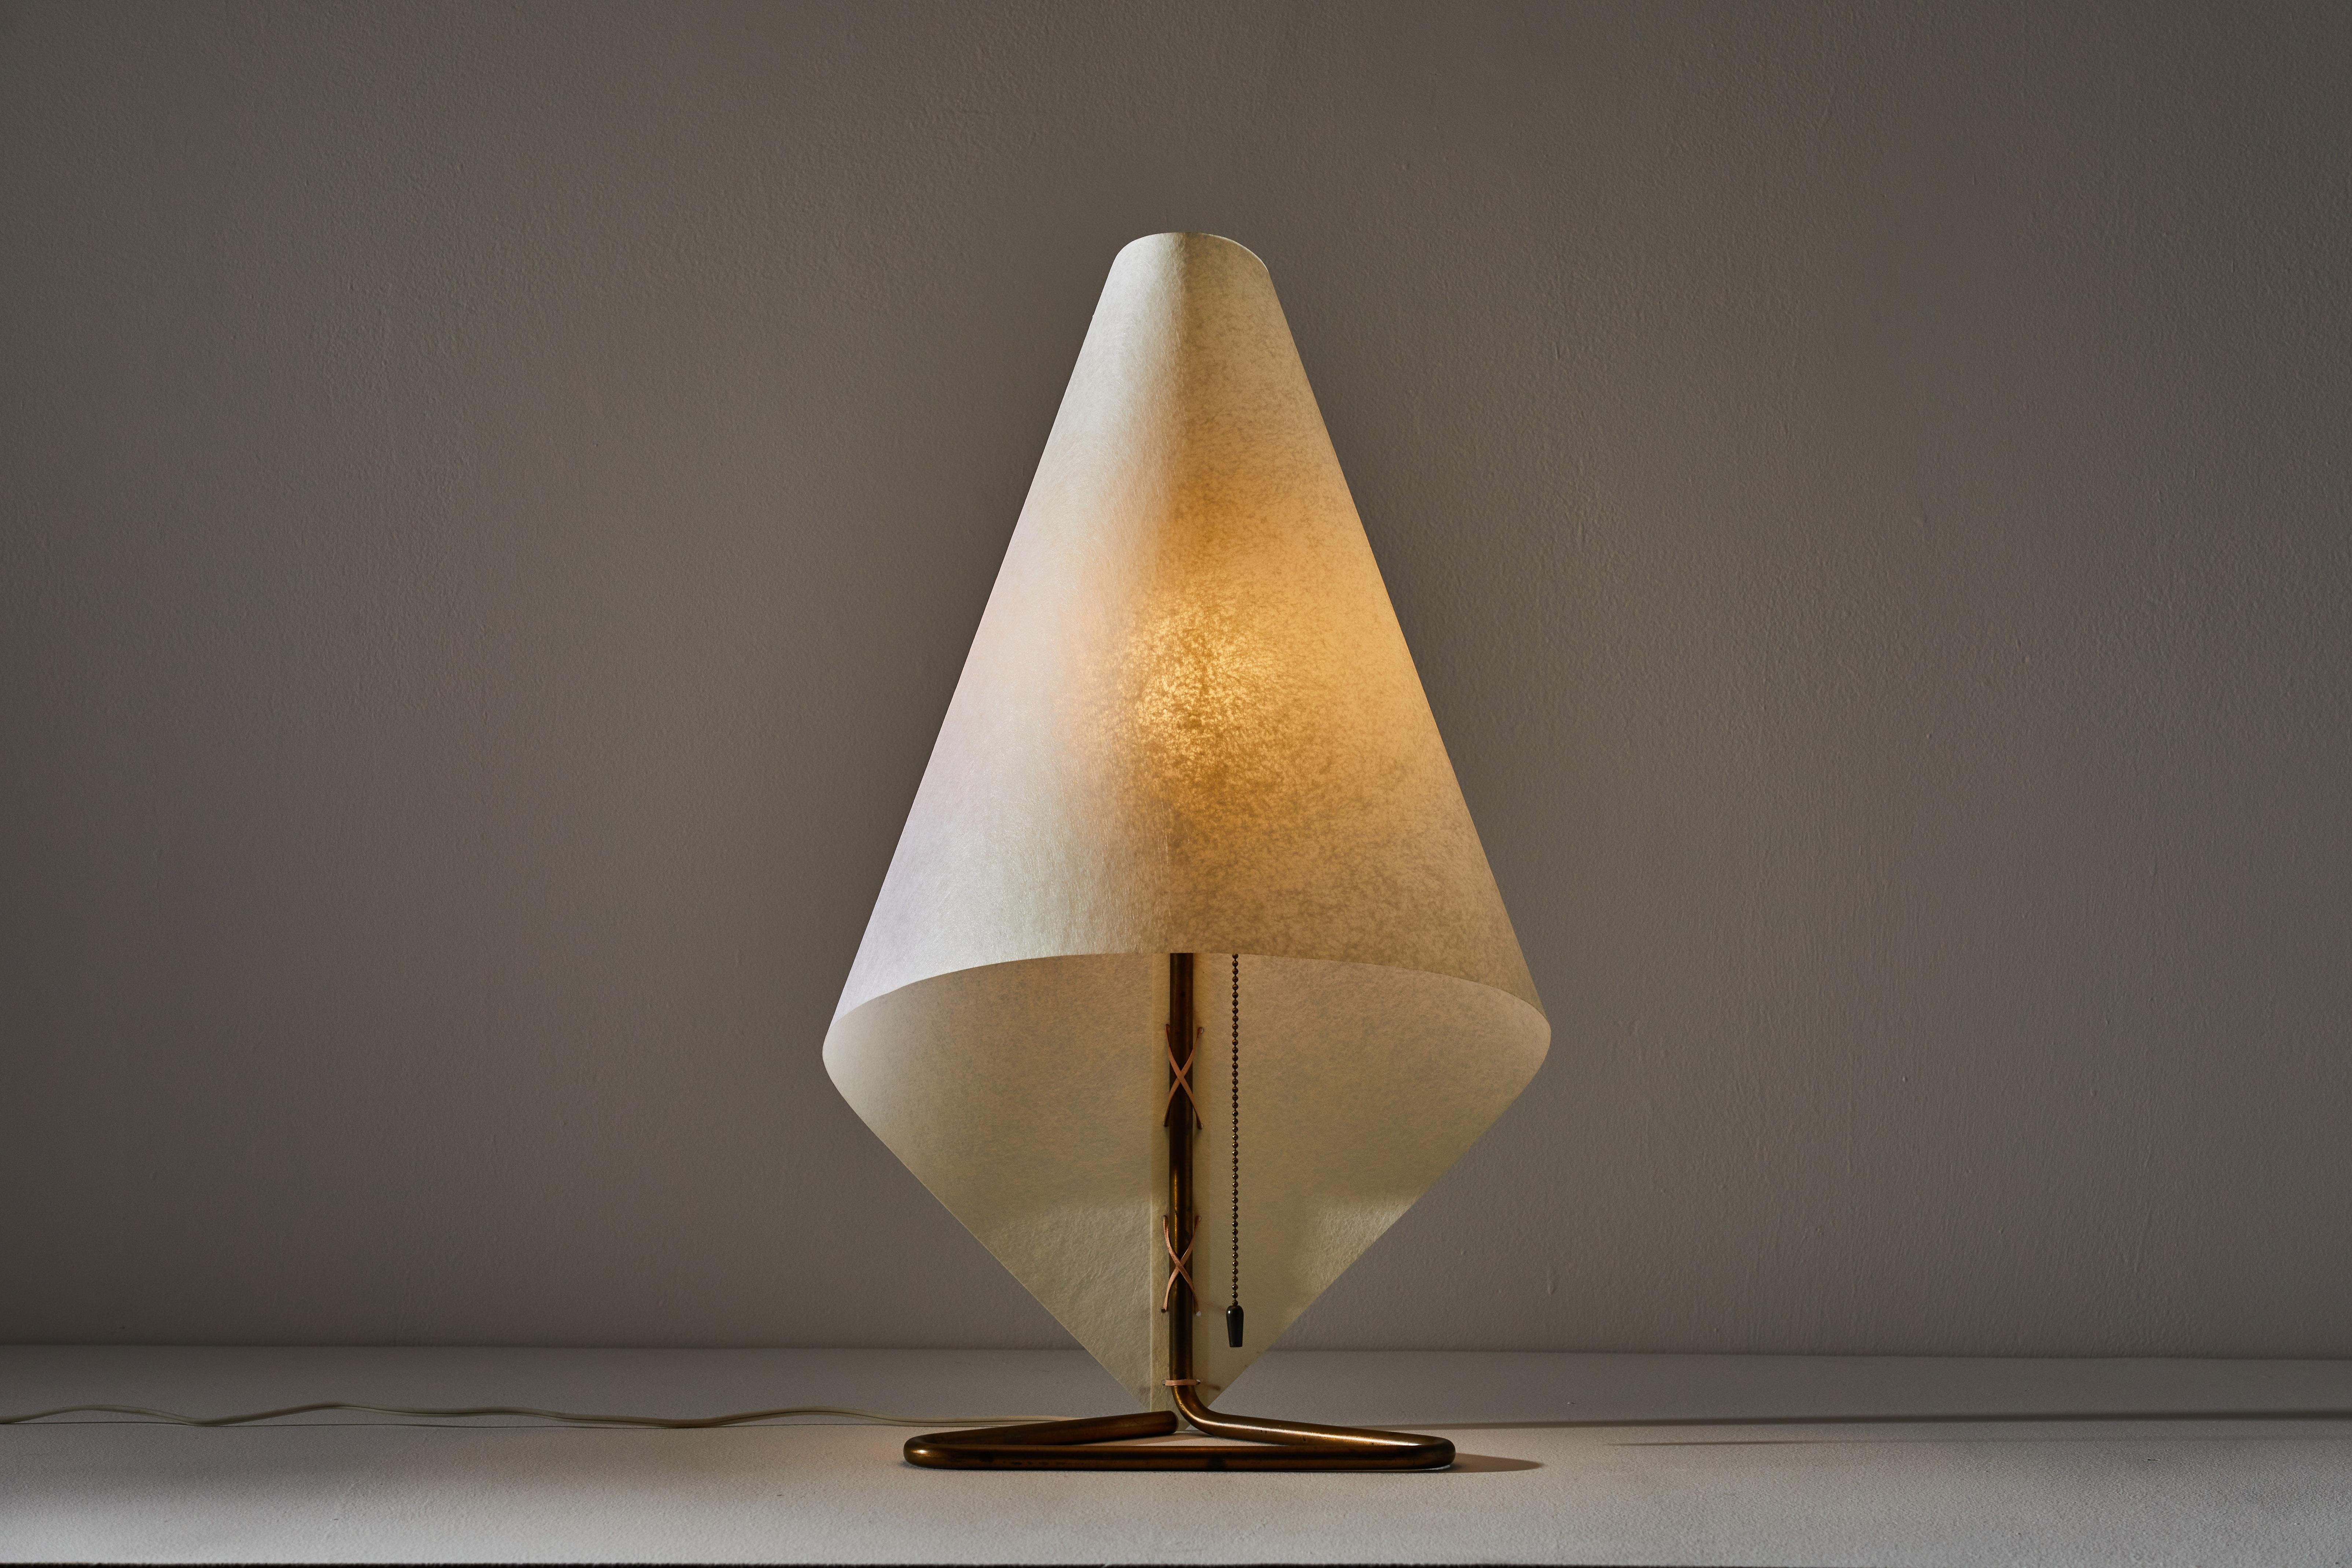 Rare and important table lamp by Henry P. Glass. Manufactured in the U.S., circa 1940s. Folded parchment shade, brass base. Rewired with new cord. One of two examples that he designed for his personal residence. These lights were never put into